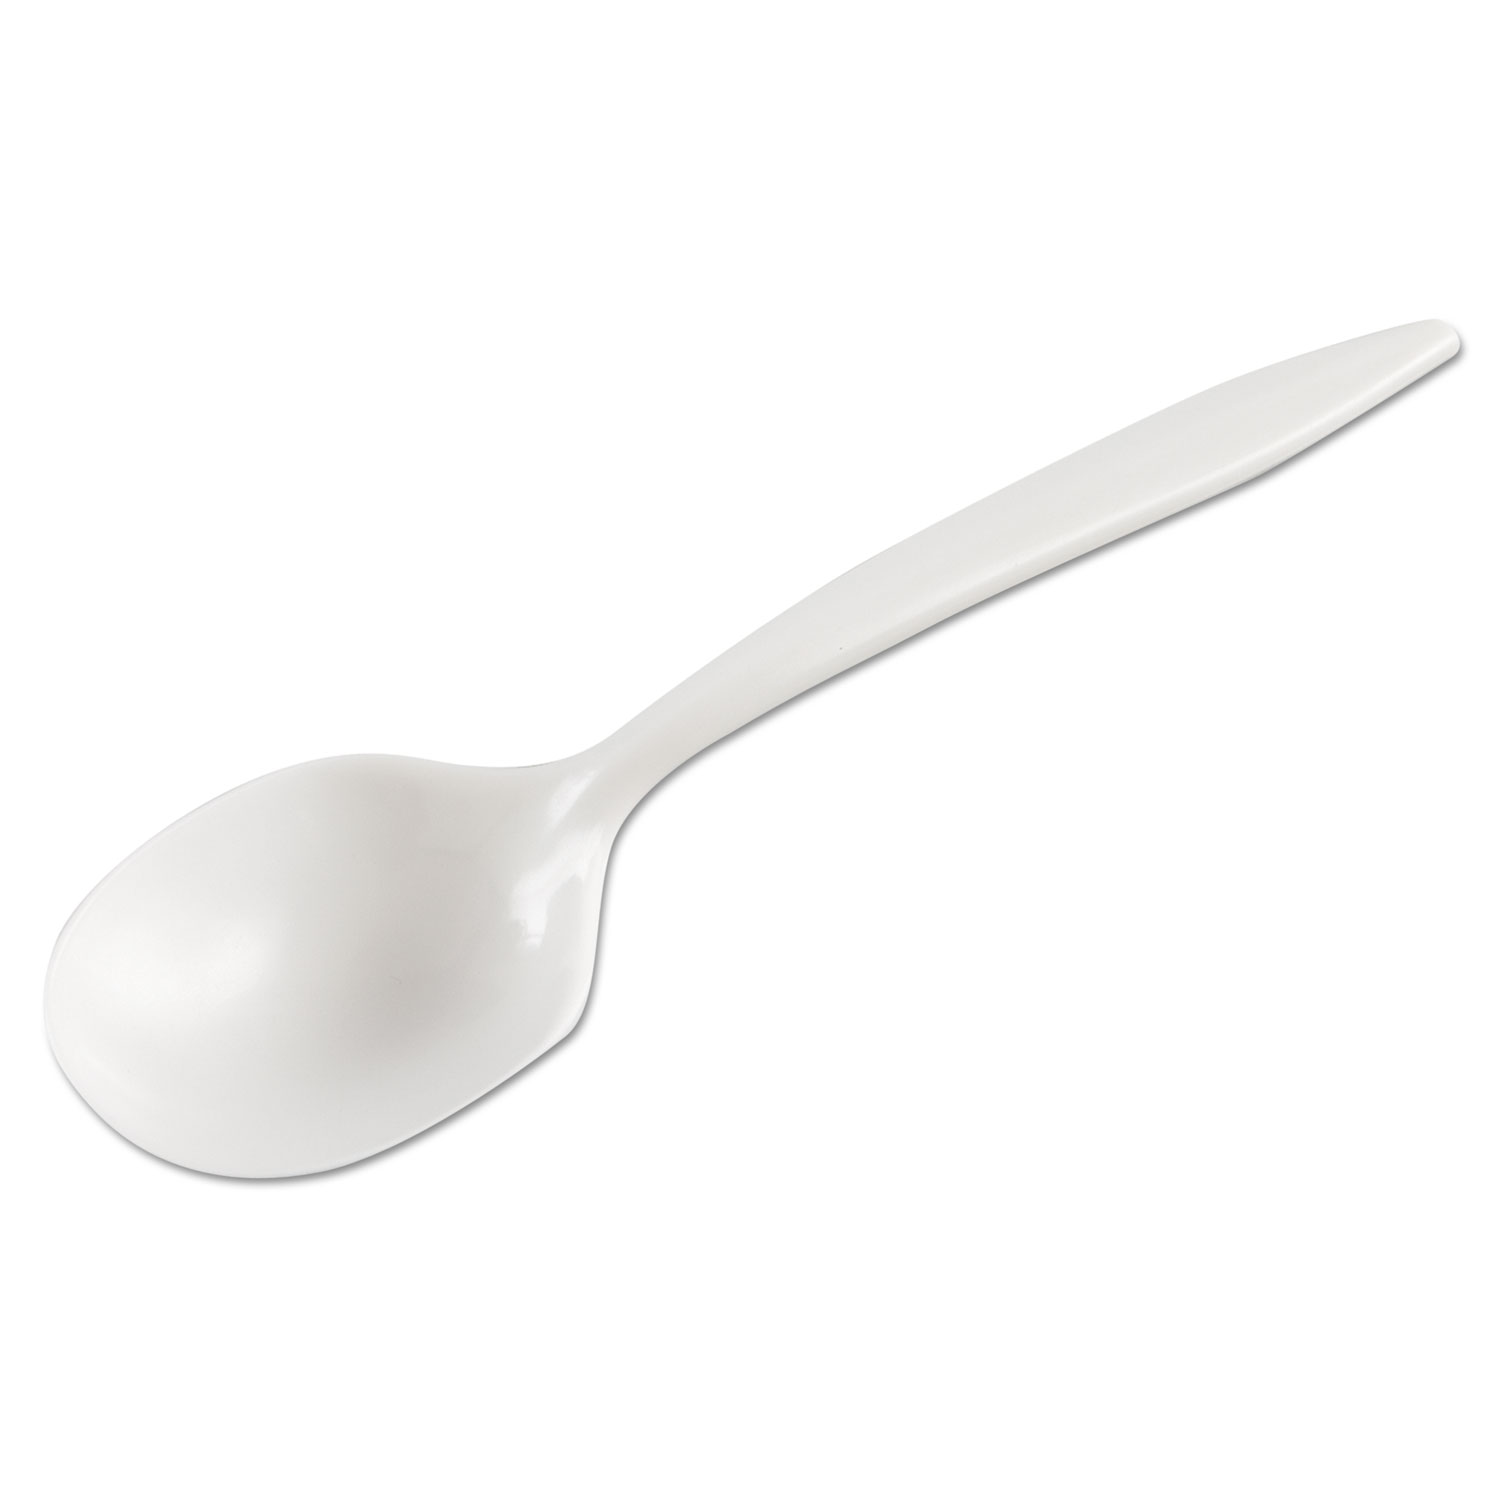 Medium-Weight Cutlery, Soup Spoon, White, 6 1/4